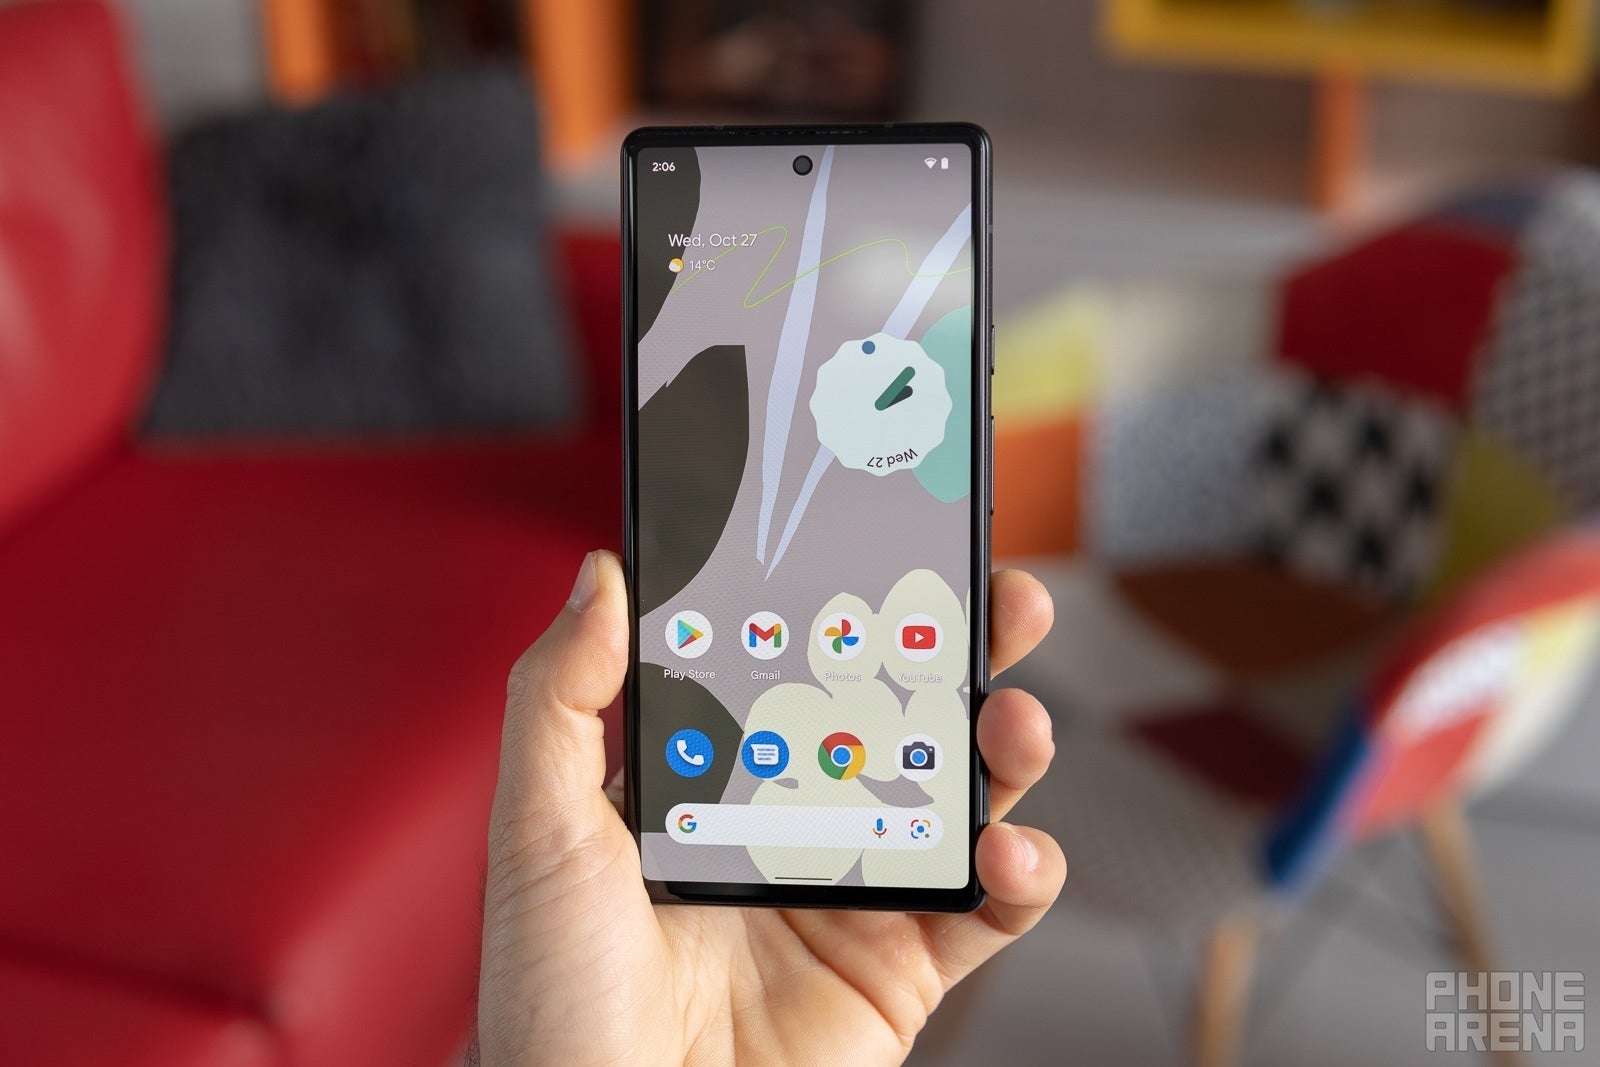 Introducing the new Google Pixel 6 – The Google Phone Built for